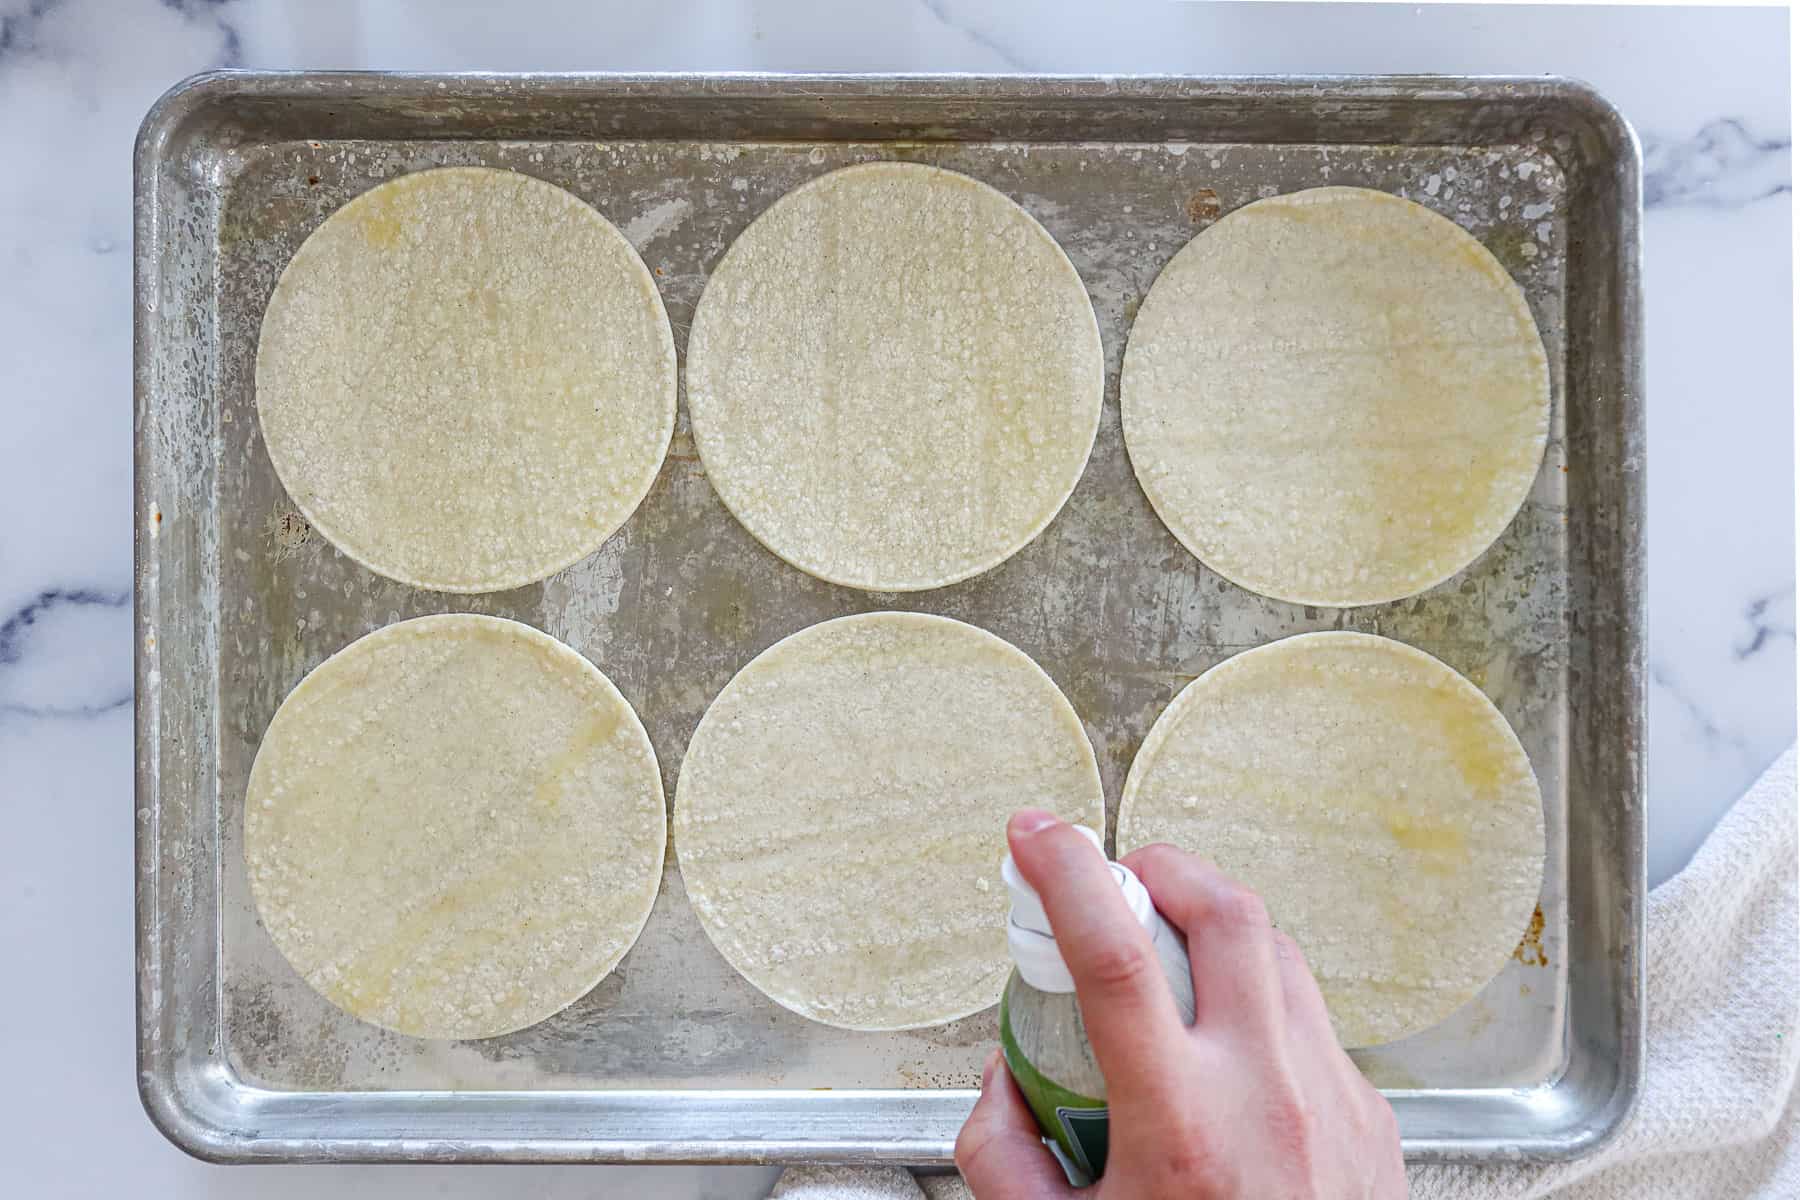 Coating corn tortillas in olive oil cooking spray.